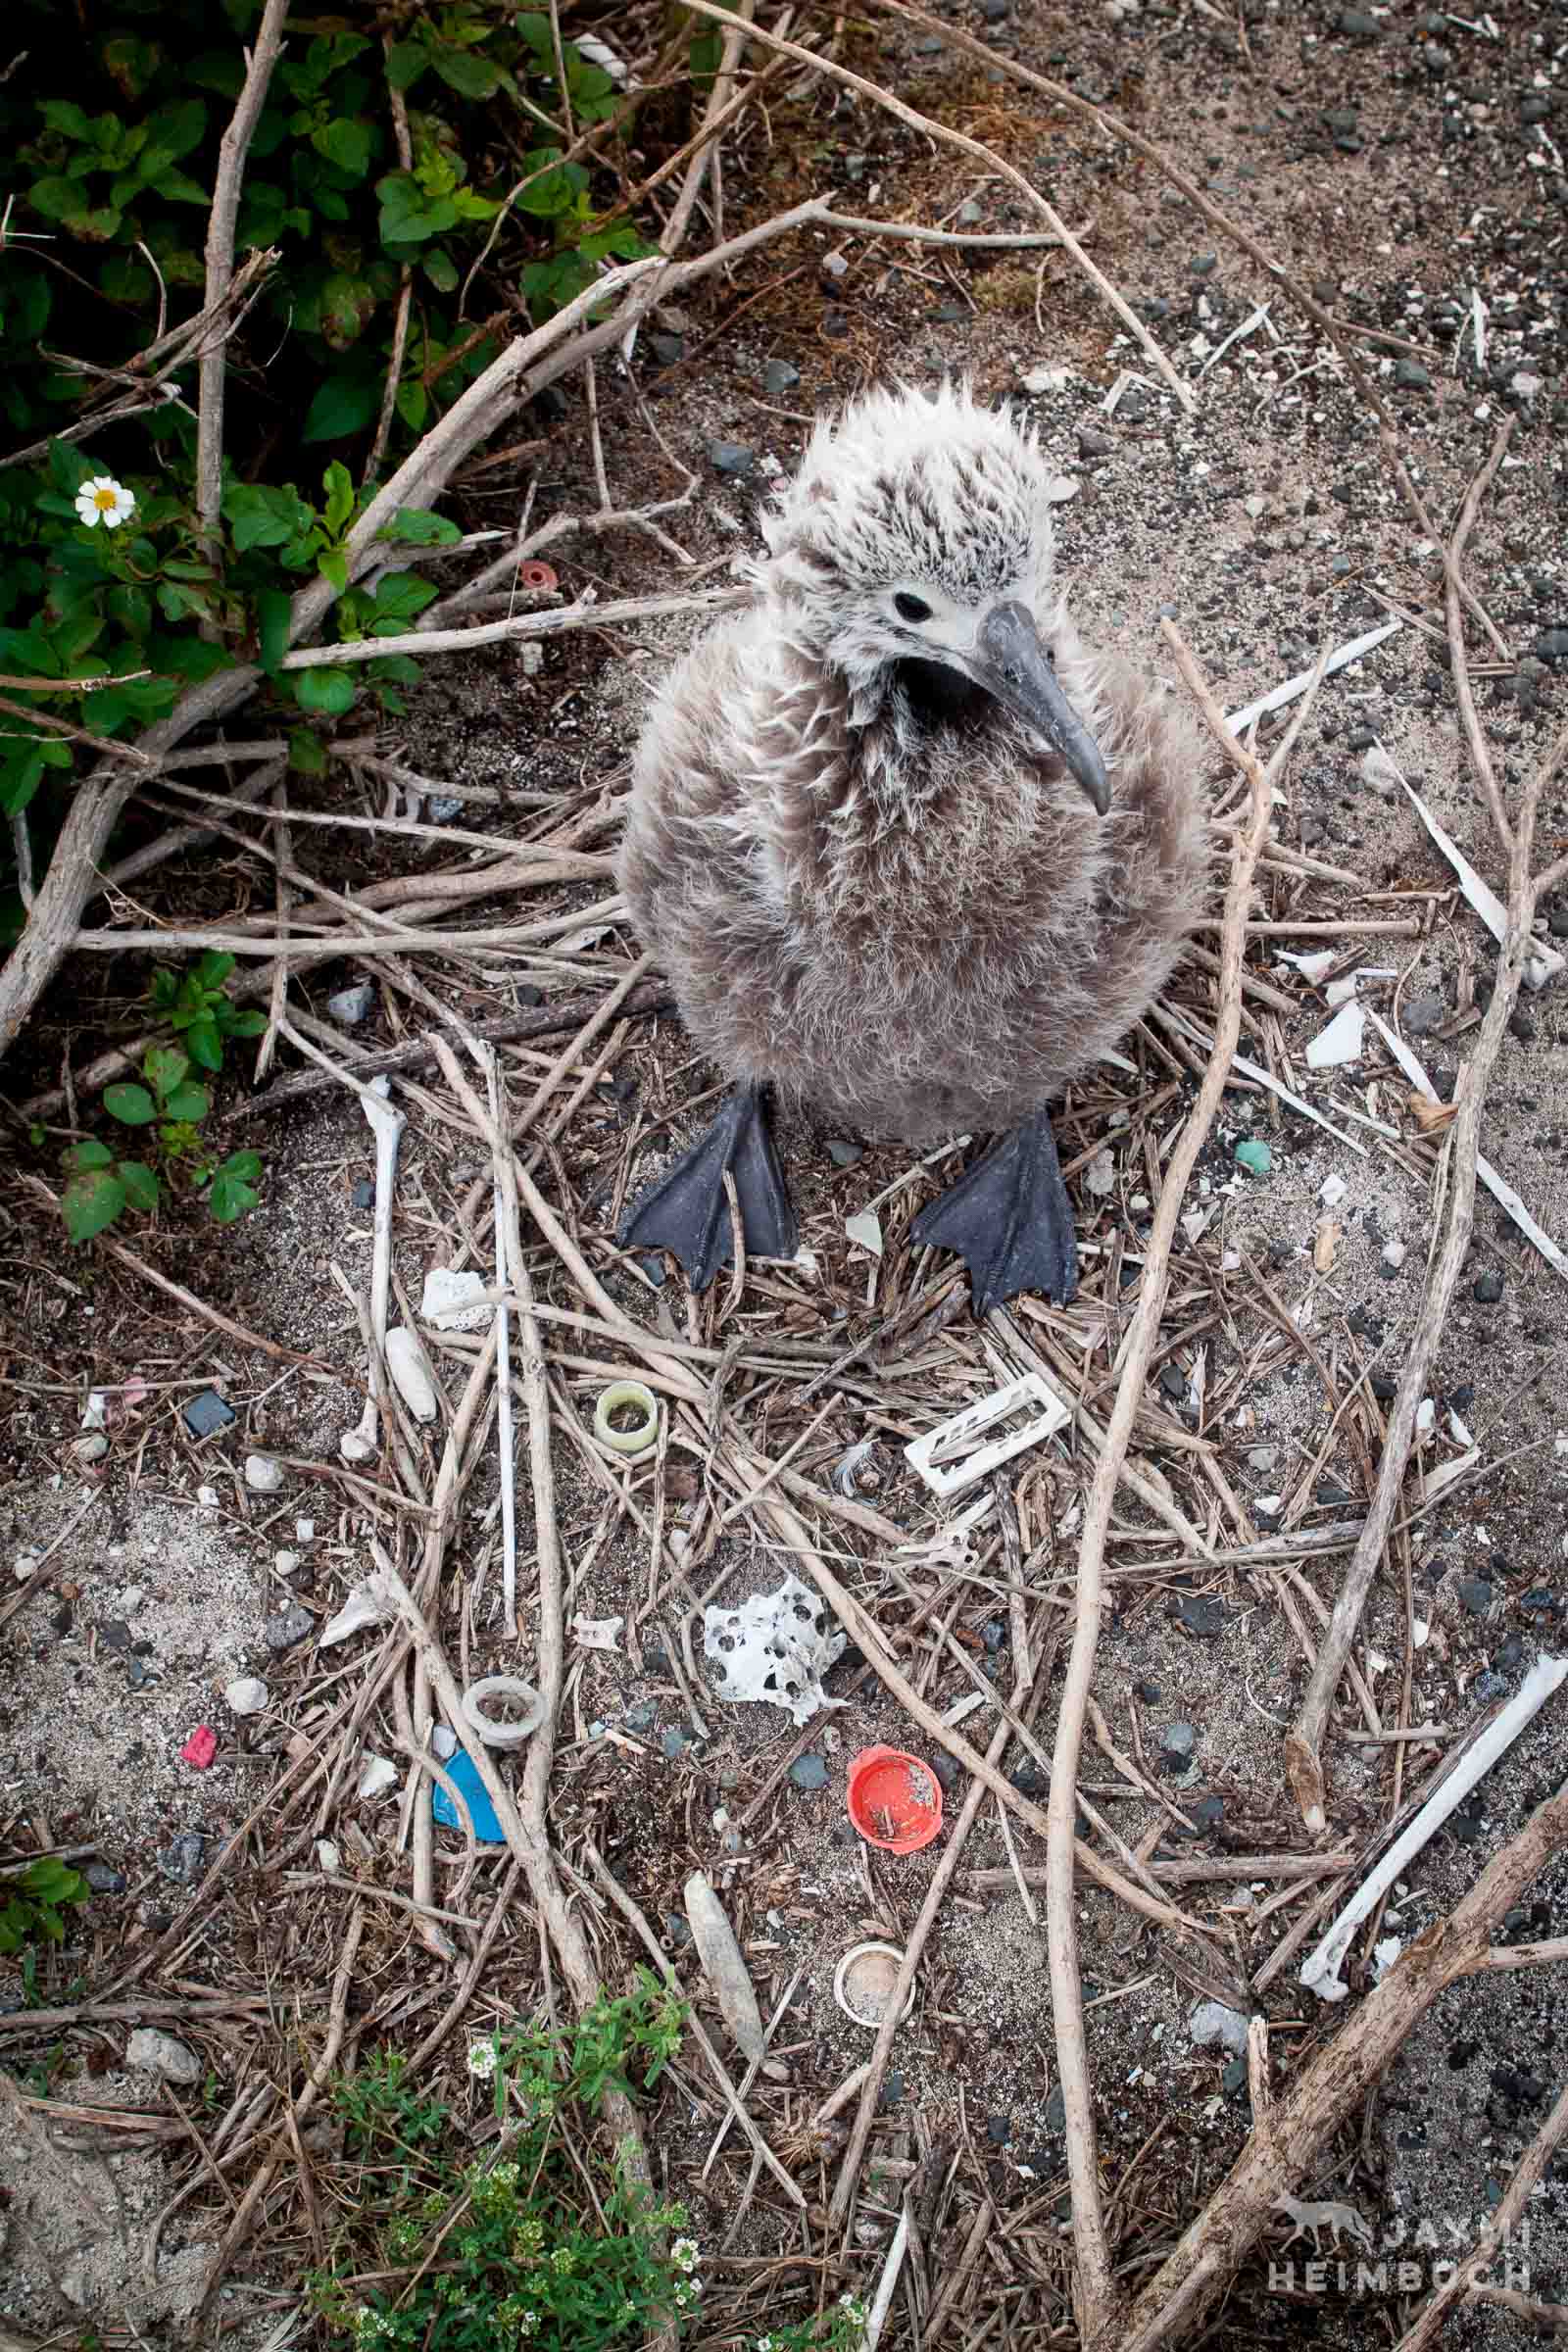 Laysan albatross (Phoebastria immutabilis) chick at nest with bones and plastic, Midway Atoll